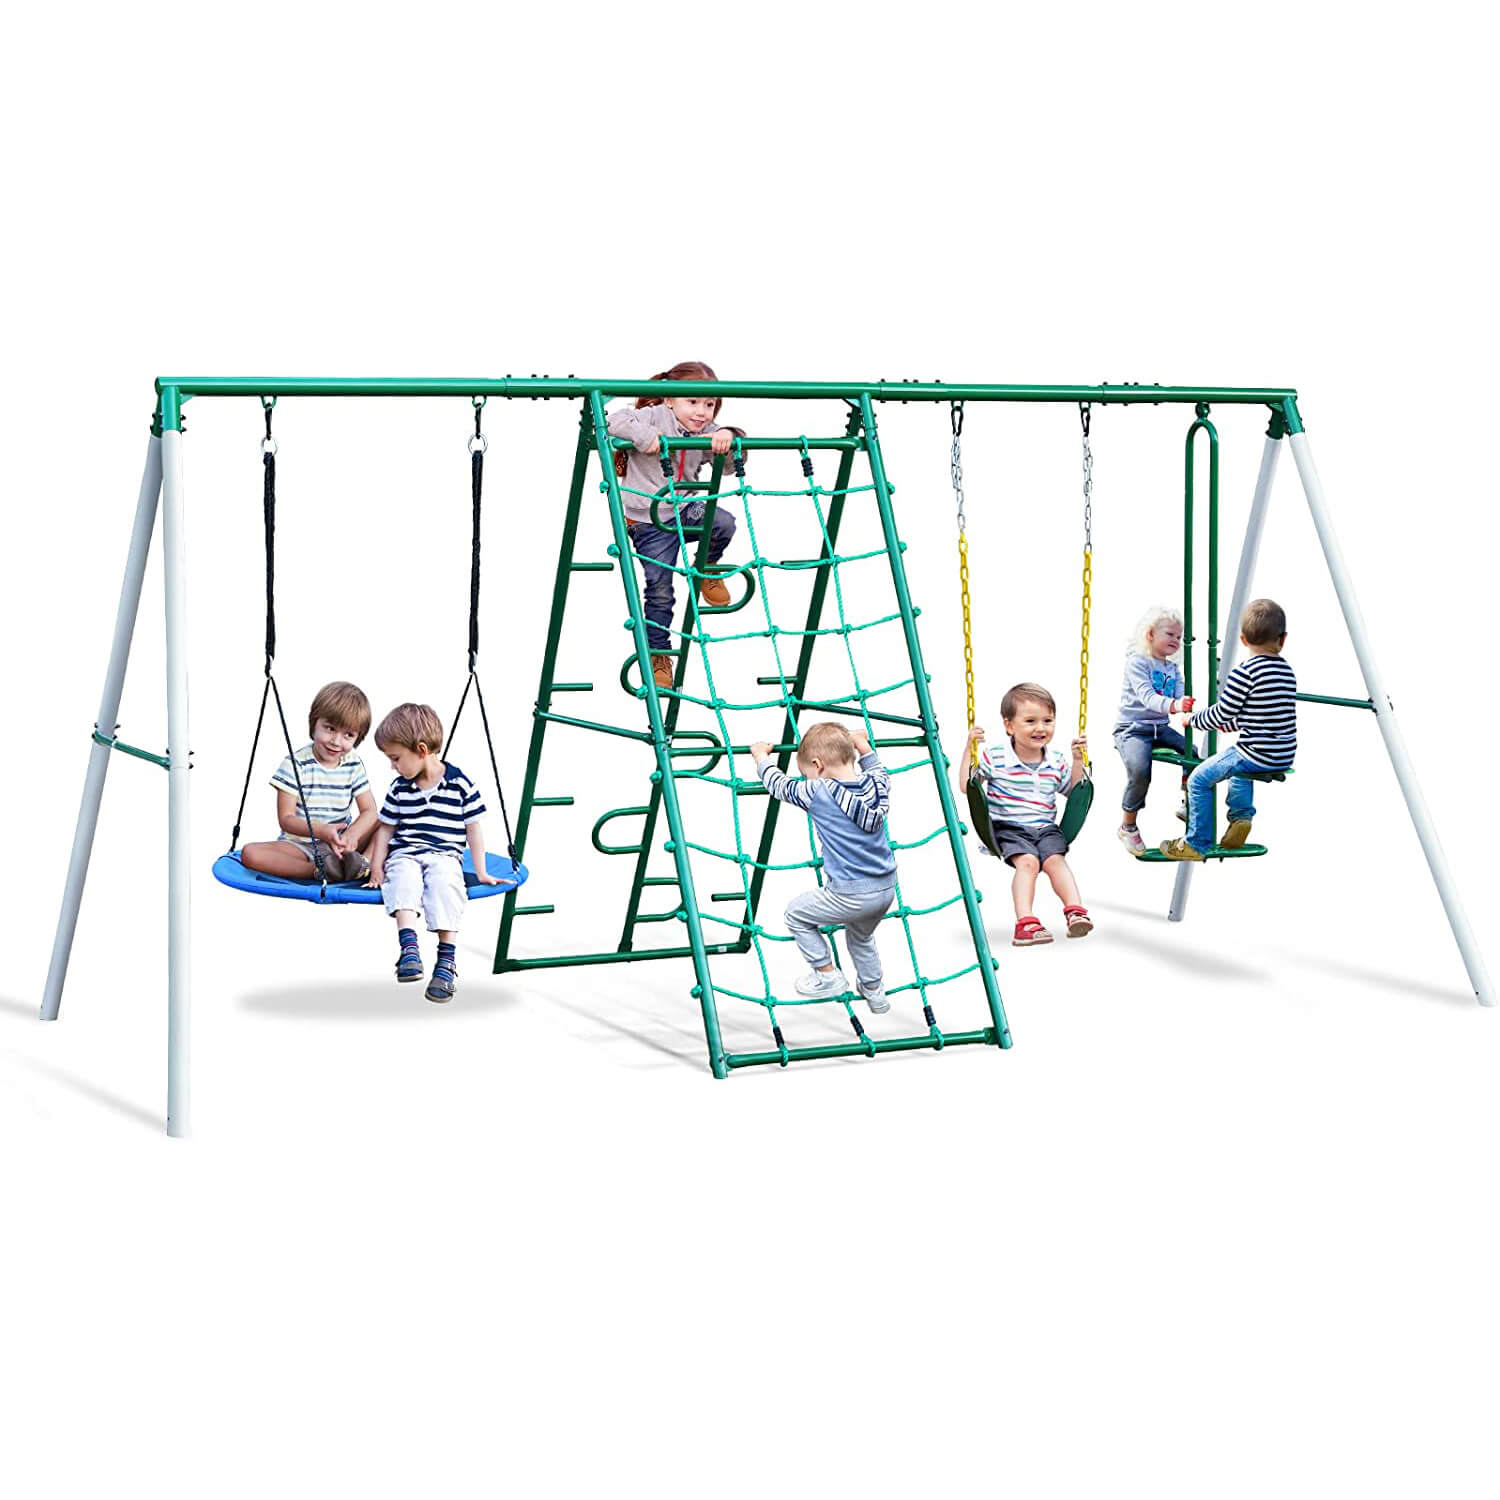 Swing Sets for Backyard with Saucer Swing,Belt Swing,Glider,Climbing Rope,Climbing Ladder.